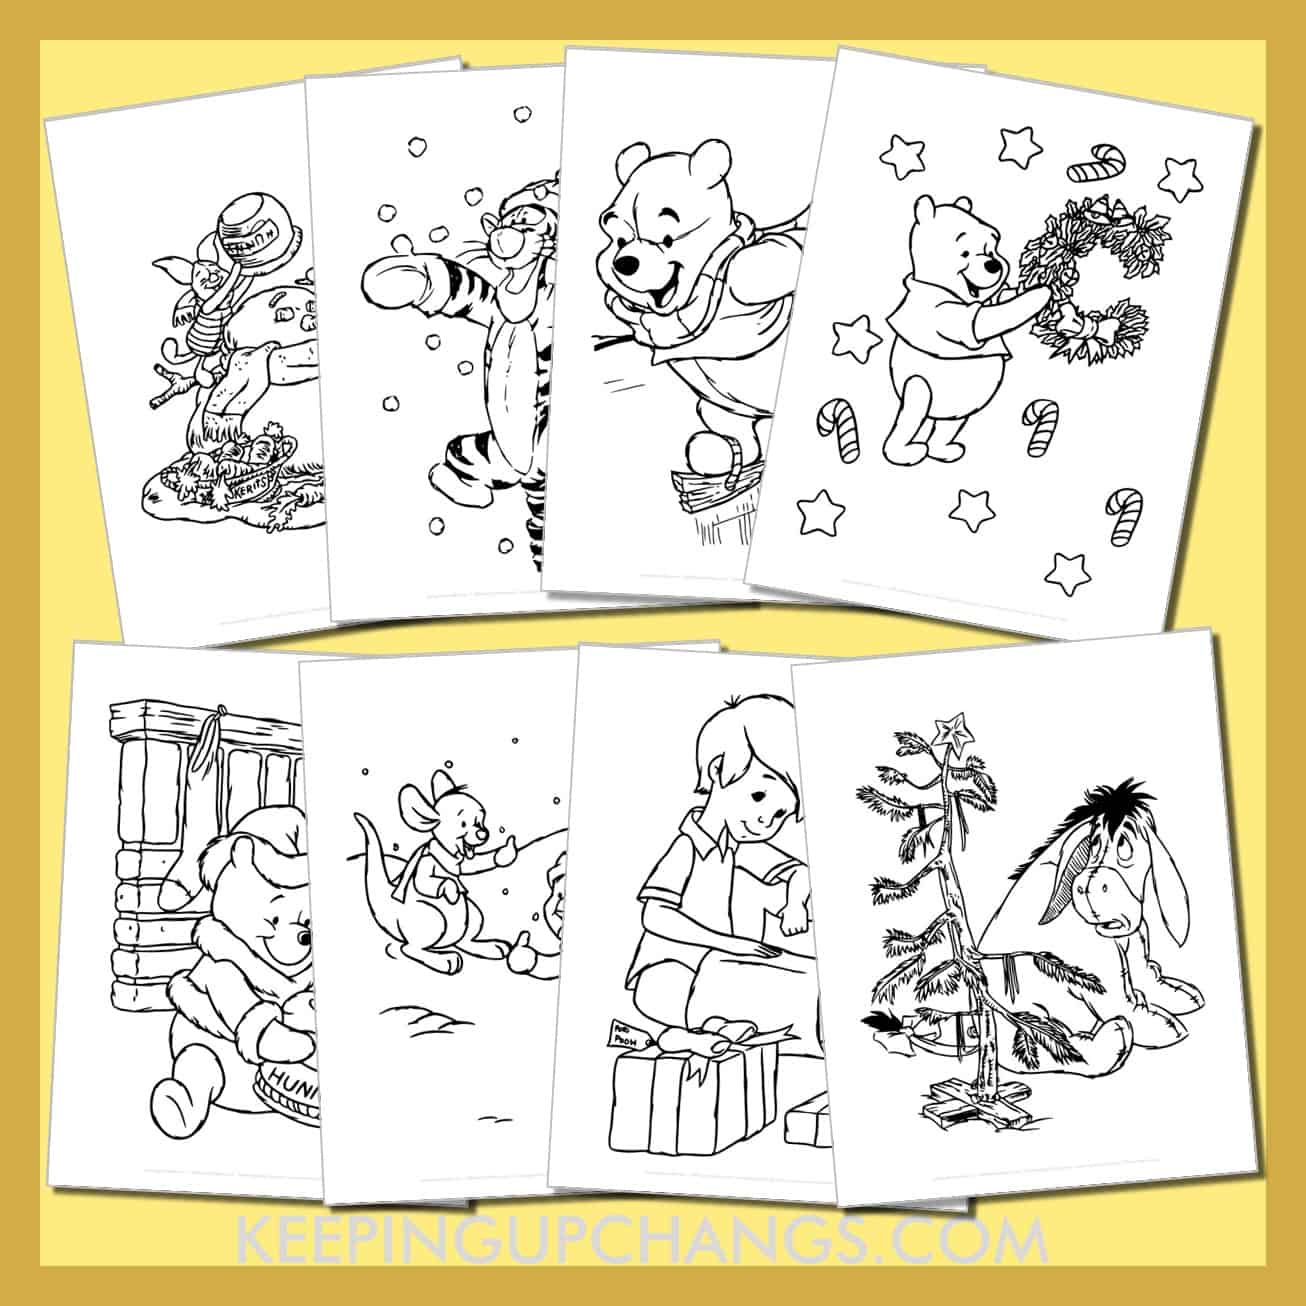 cute winnie the pooh christmas colouring sheets including tigger, piglet, roo, eeyore, rabbit, and more.